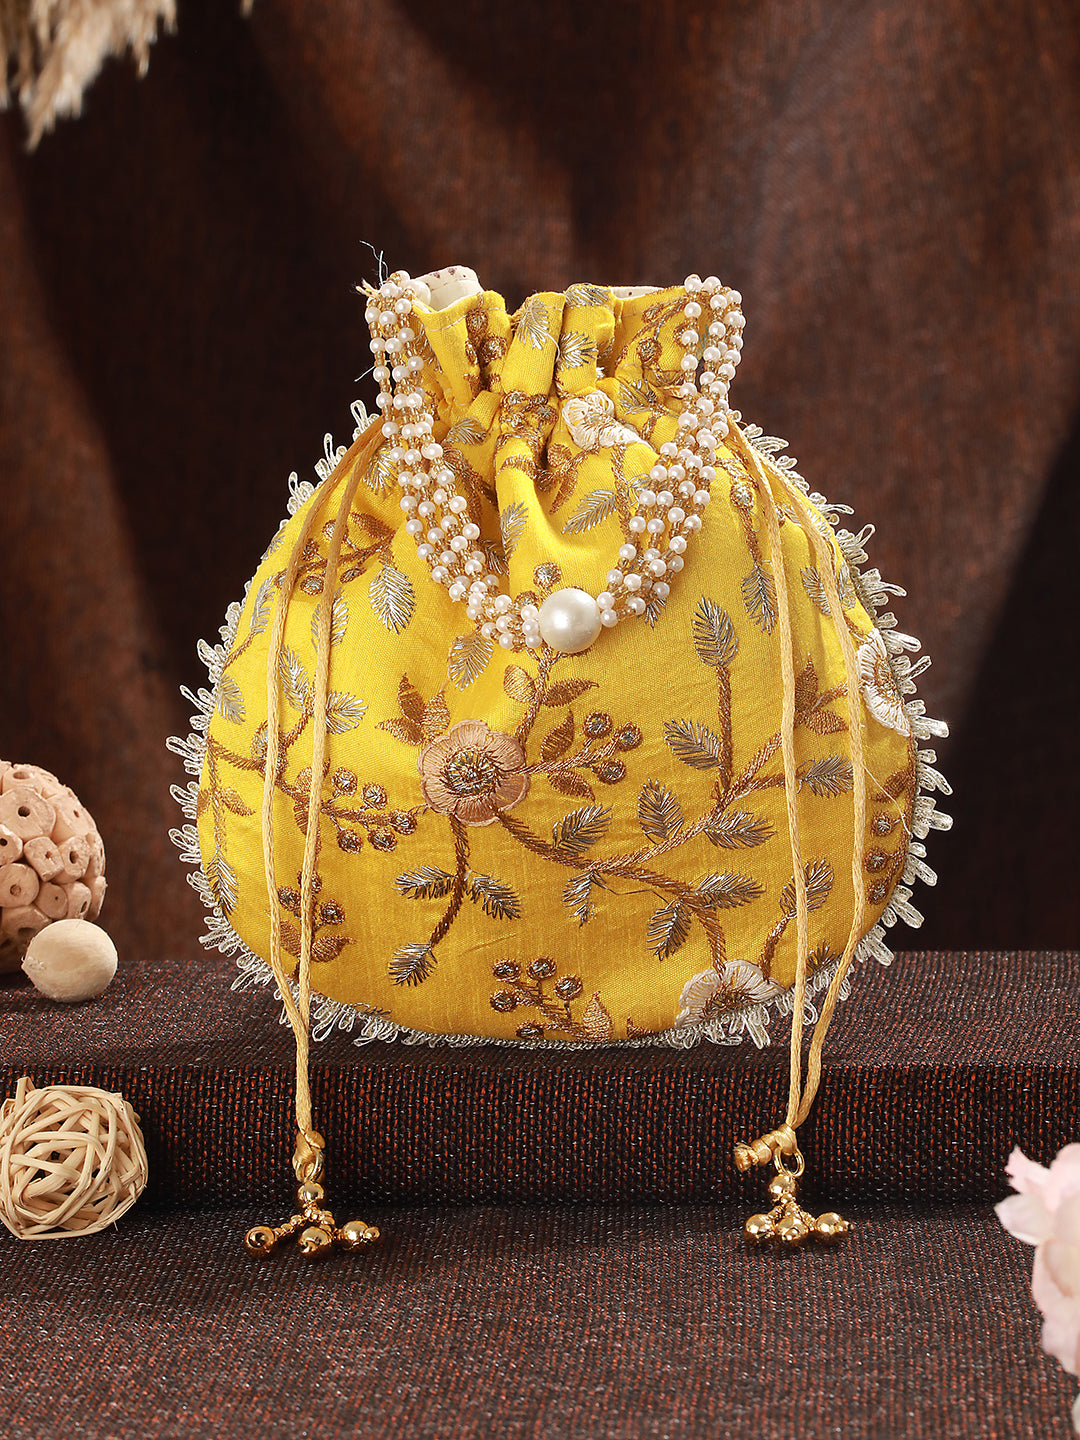 Yellow & Gold-Toned with Rich Embroidered Potli Clutch - Jazzandsizzle